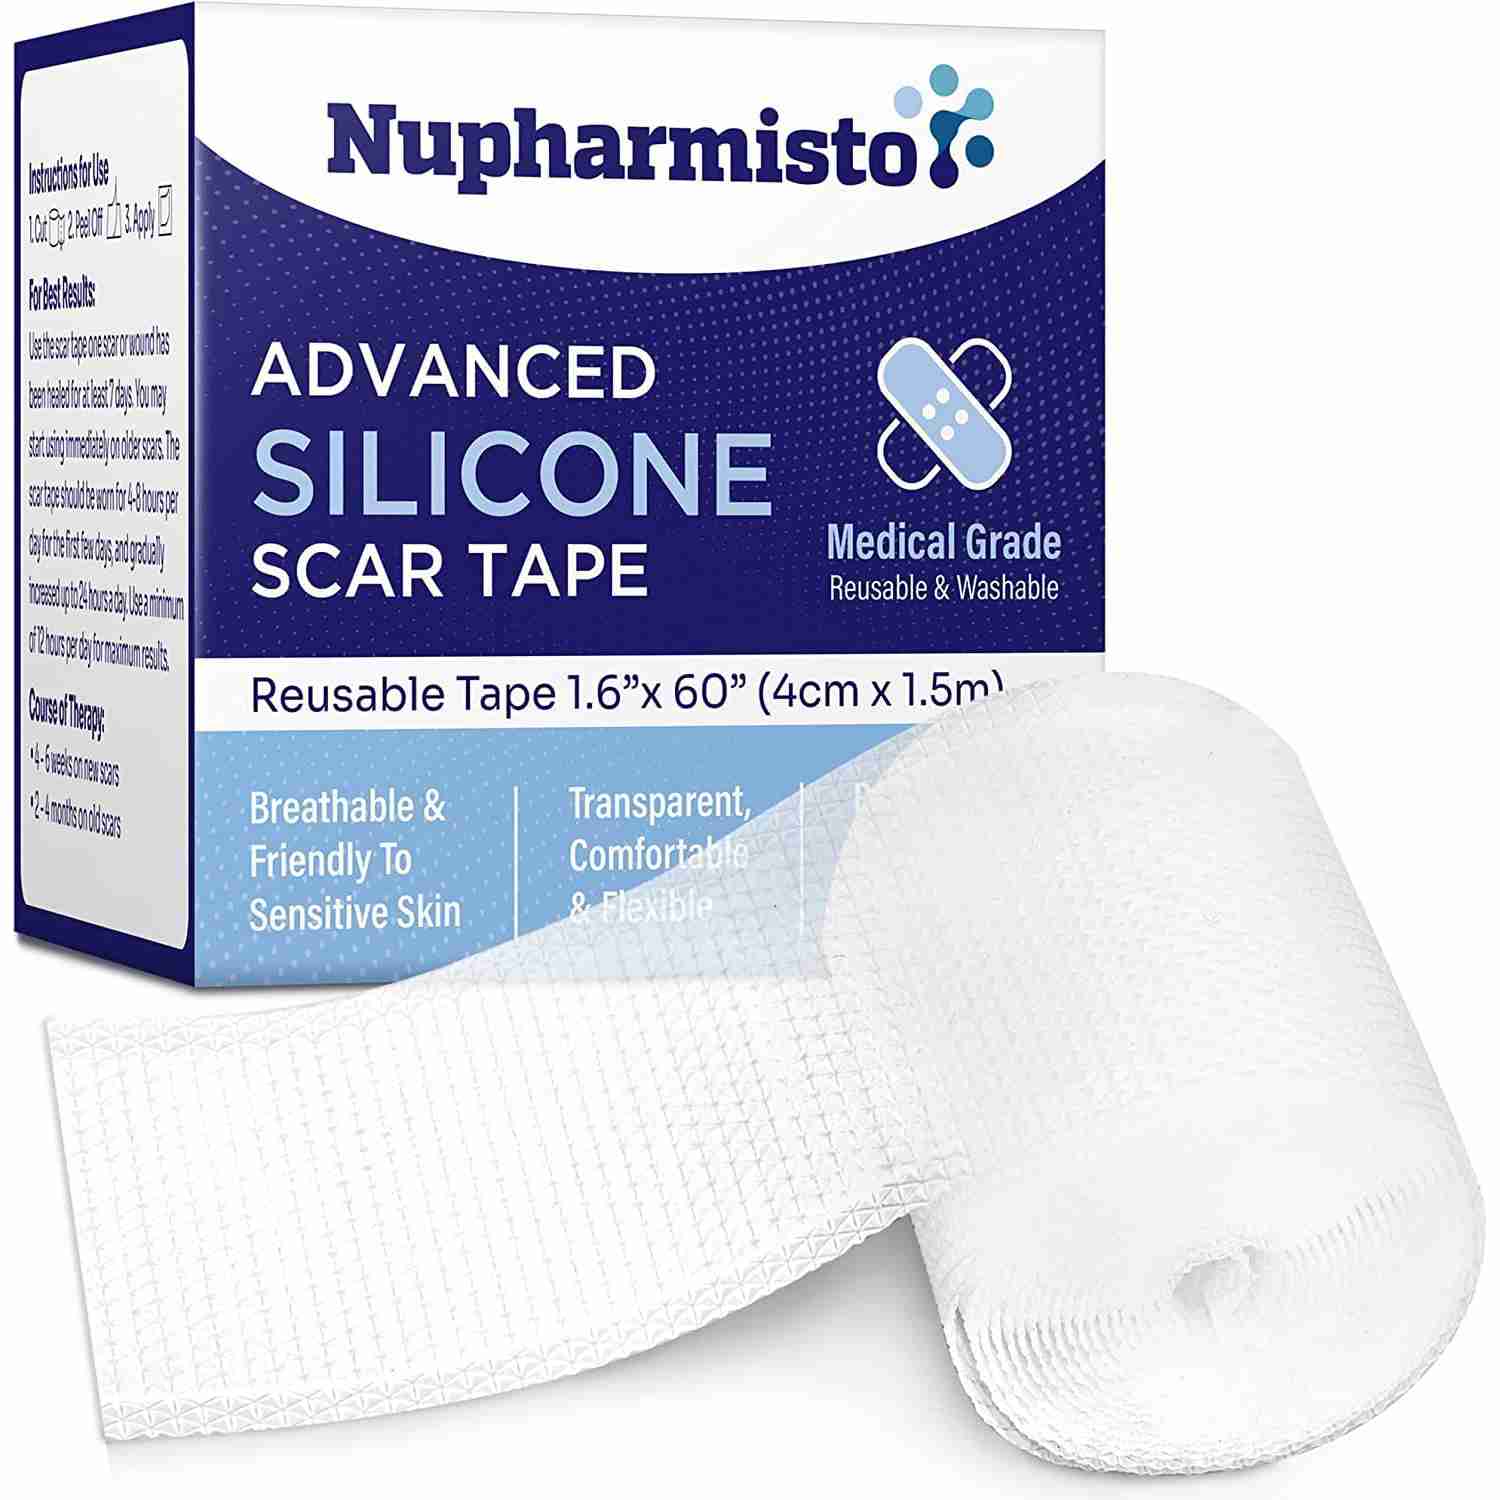 silicone-scar-strips-nupharmisto with cash back rebate